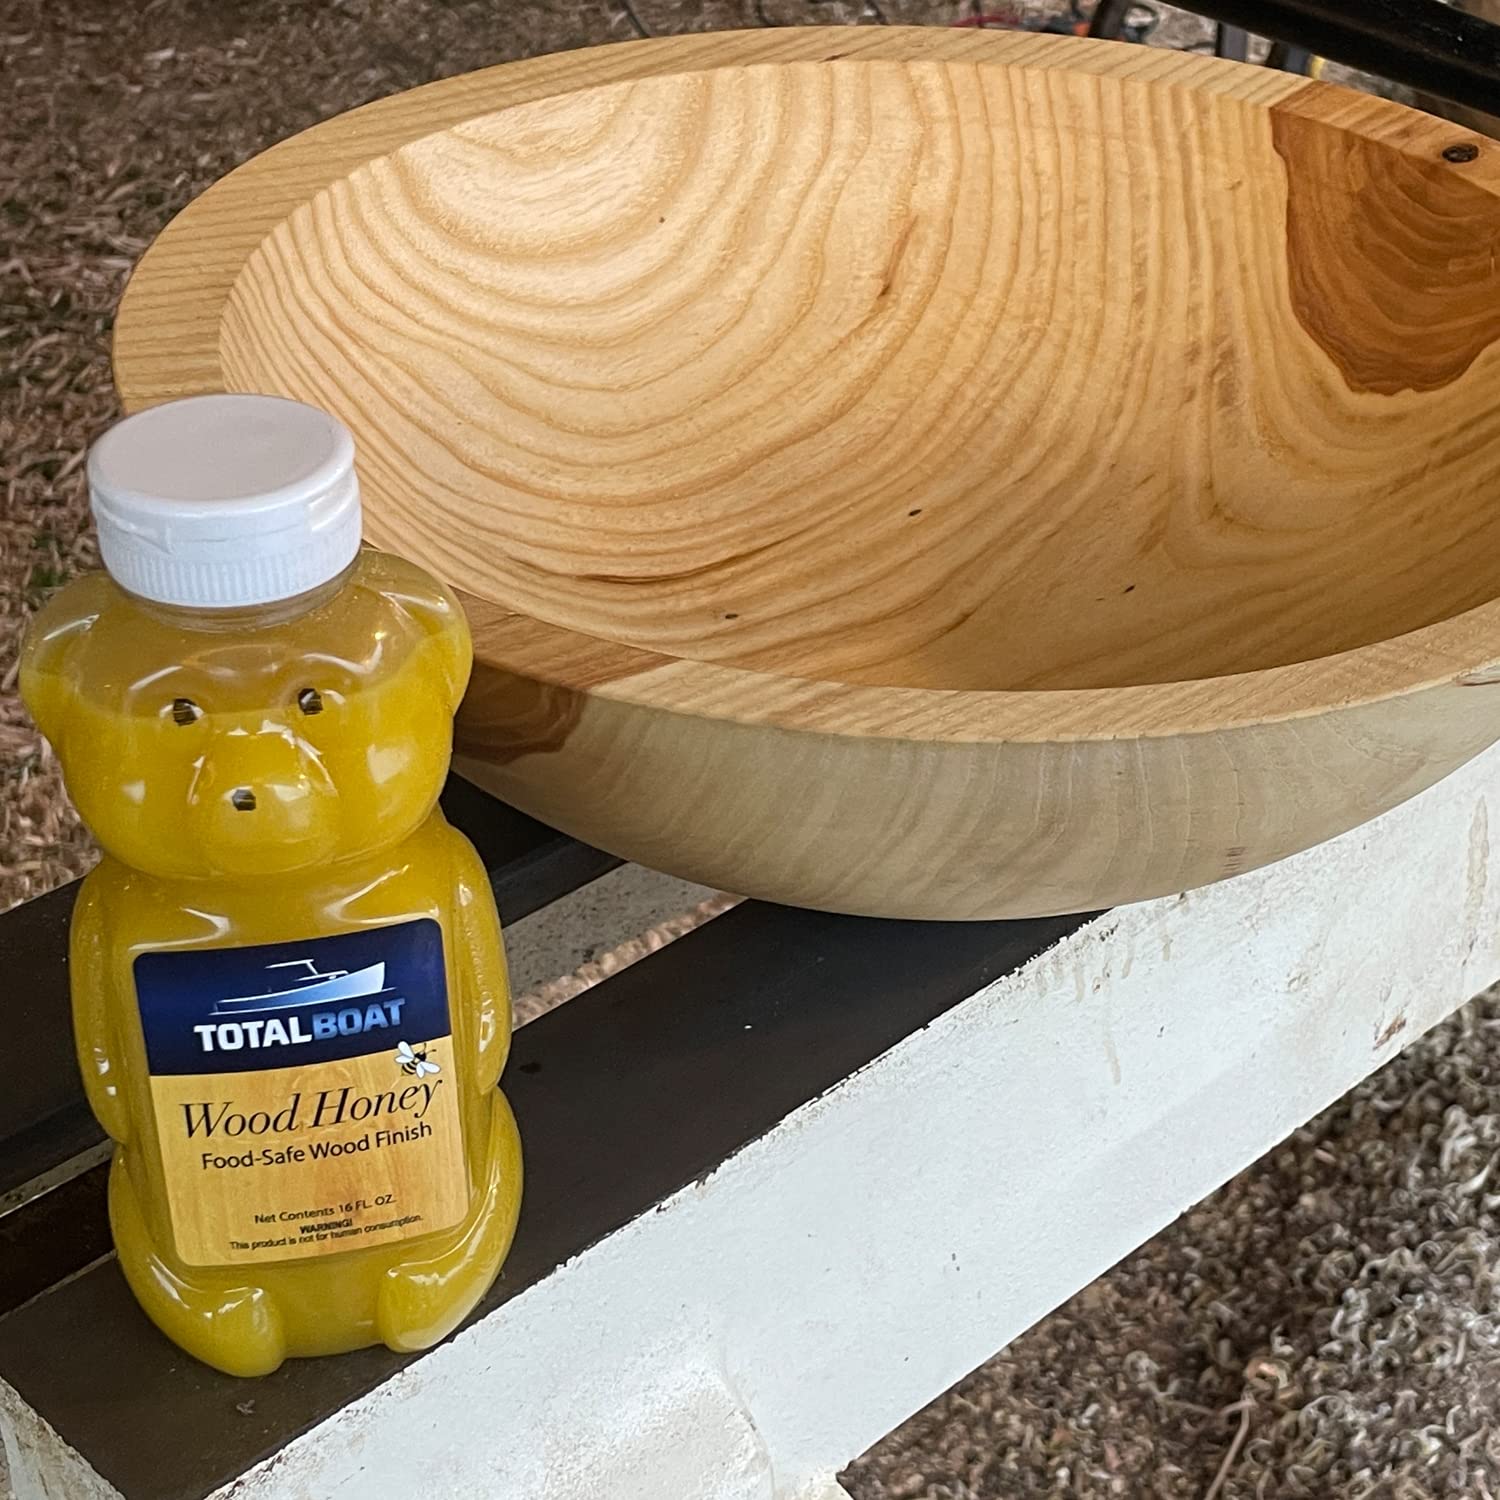 TotalBoat Wood Honey Food Safe Wood Finish - Wood Oil for Cutting Boards & Butcher Blocks (8 oz) : Health & Household